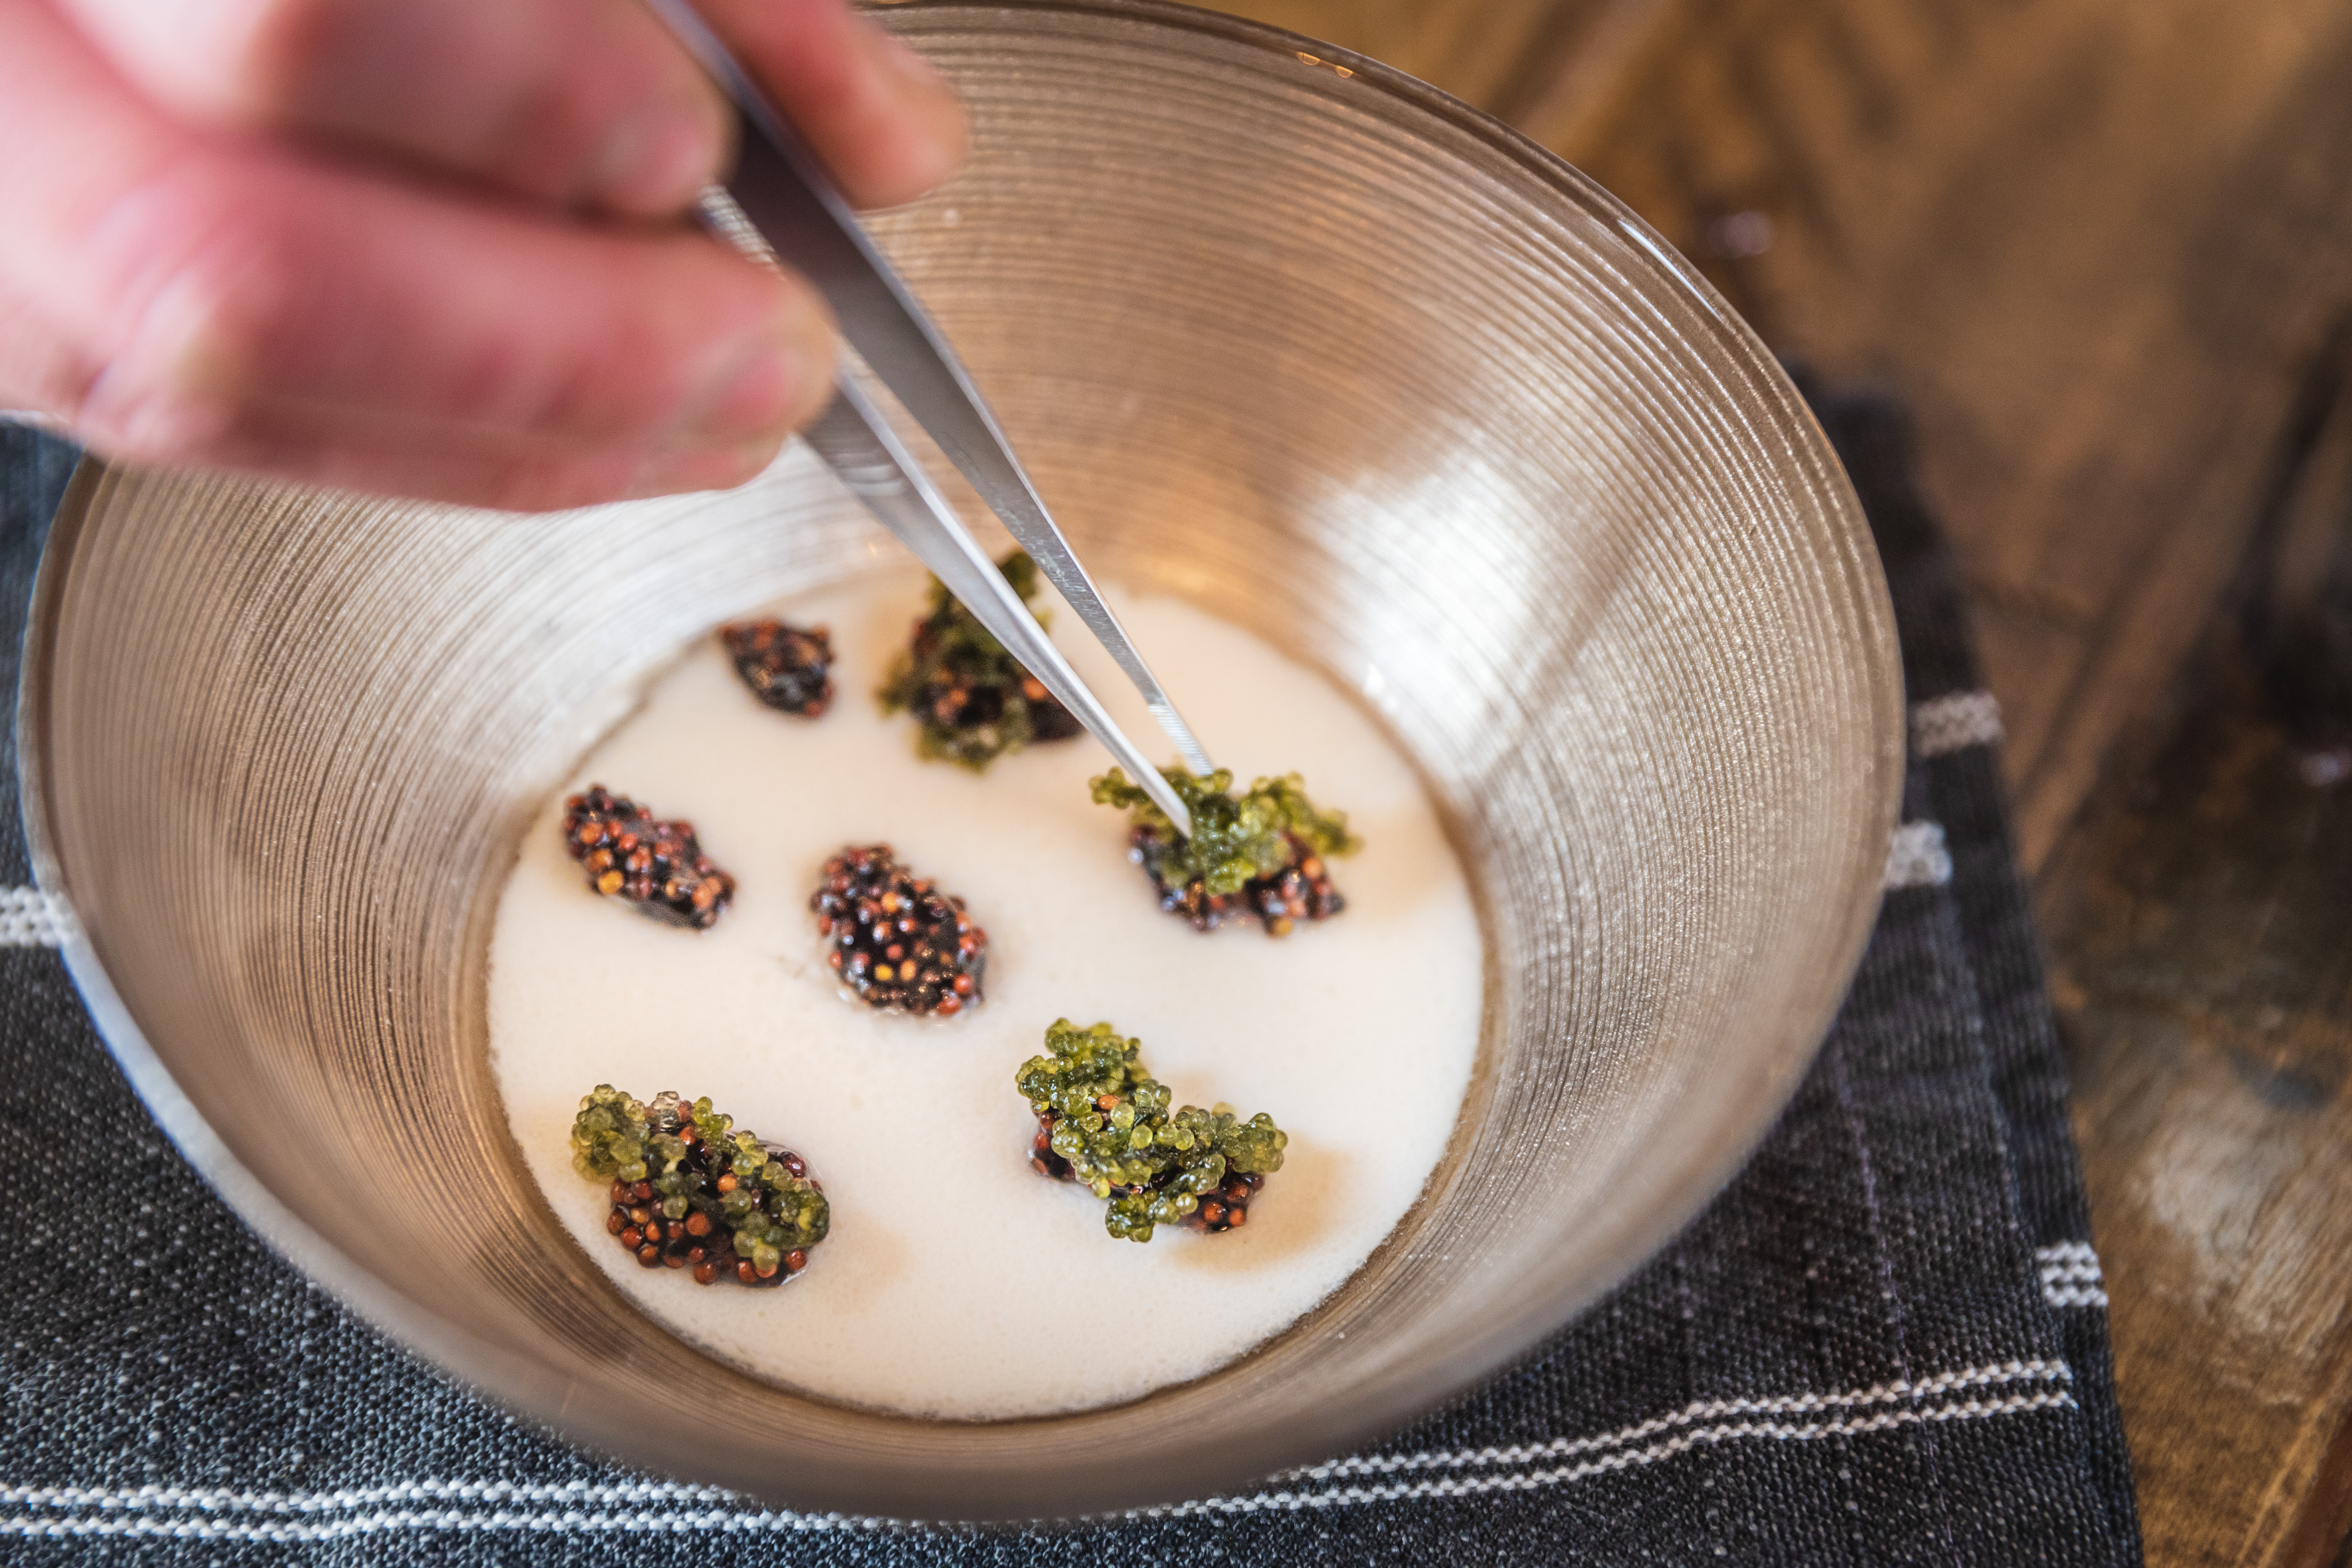 A chef’s hand uses tweezers to balance vegan caviar atop a cream-colored broth in a silver bowl.